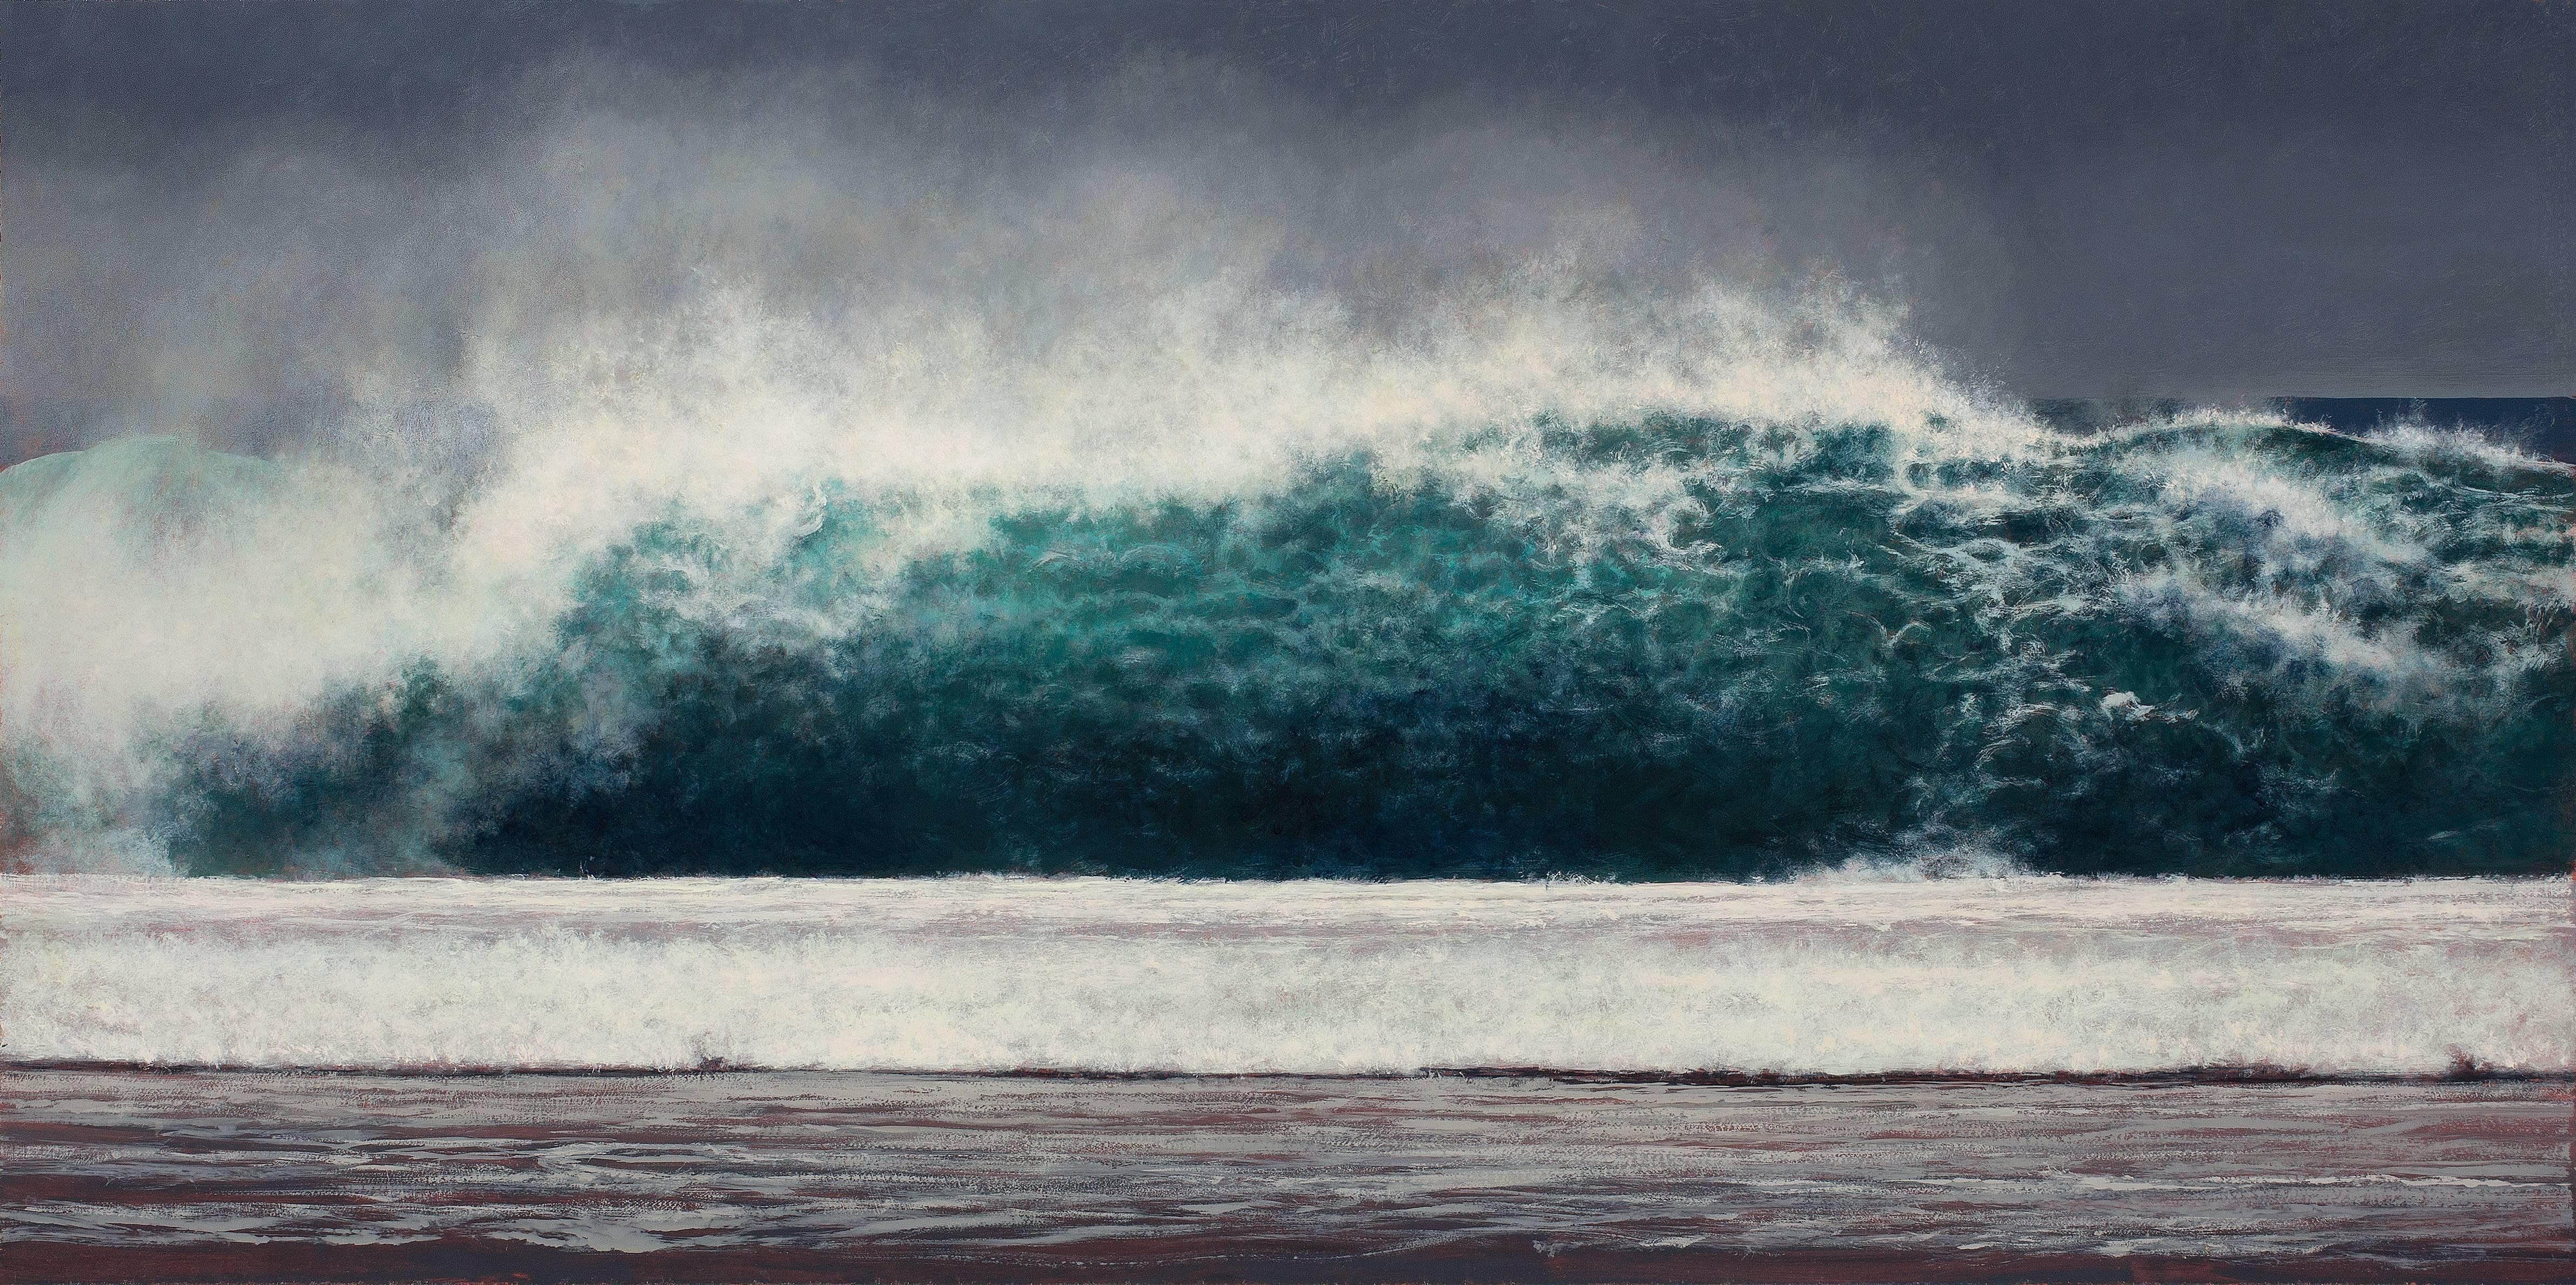 Jeff Aeling Landscape Painting - Wave, Kauai - Oil on Panel Painting in Blue Turquoise, White Sea Foam and Gray